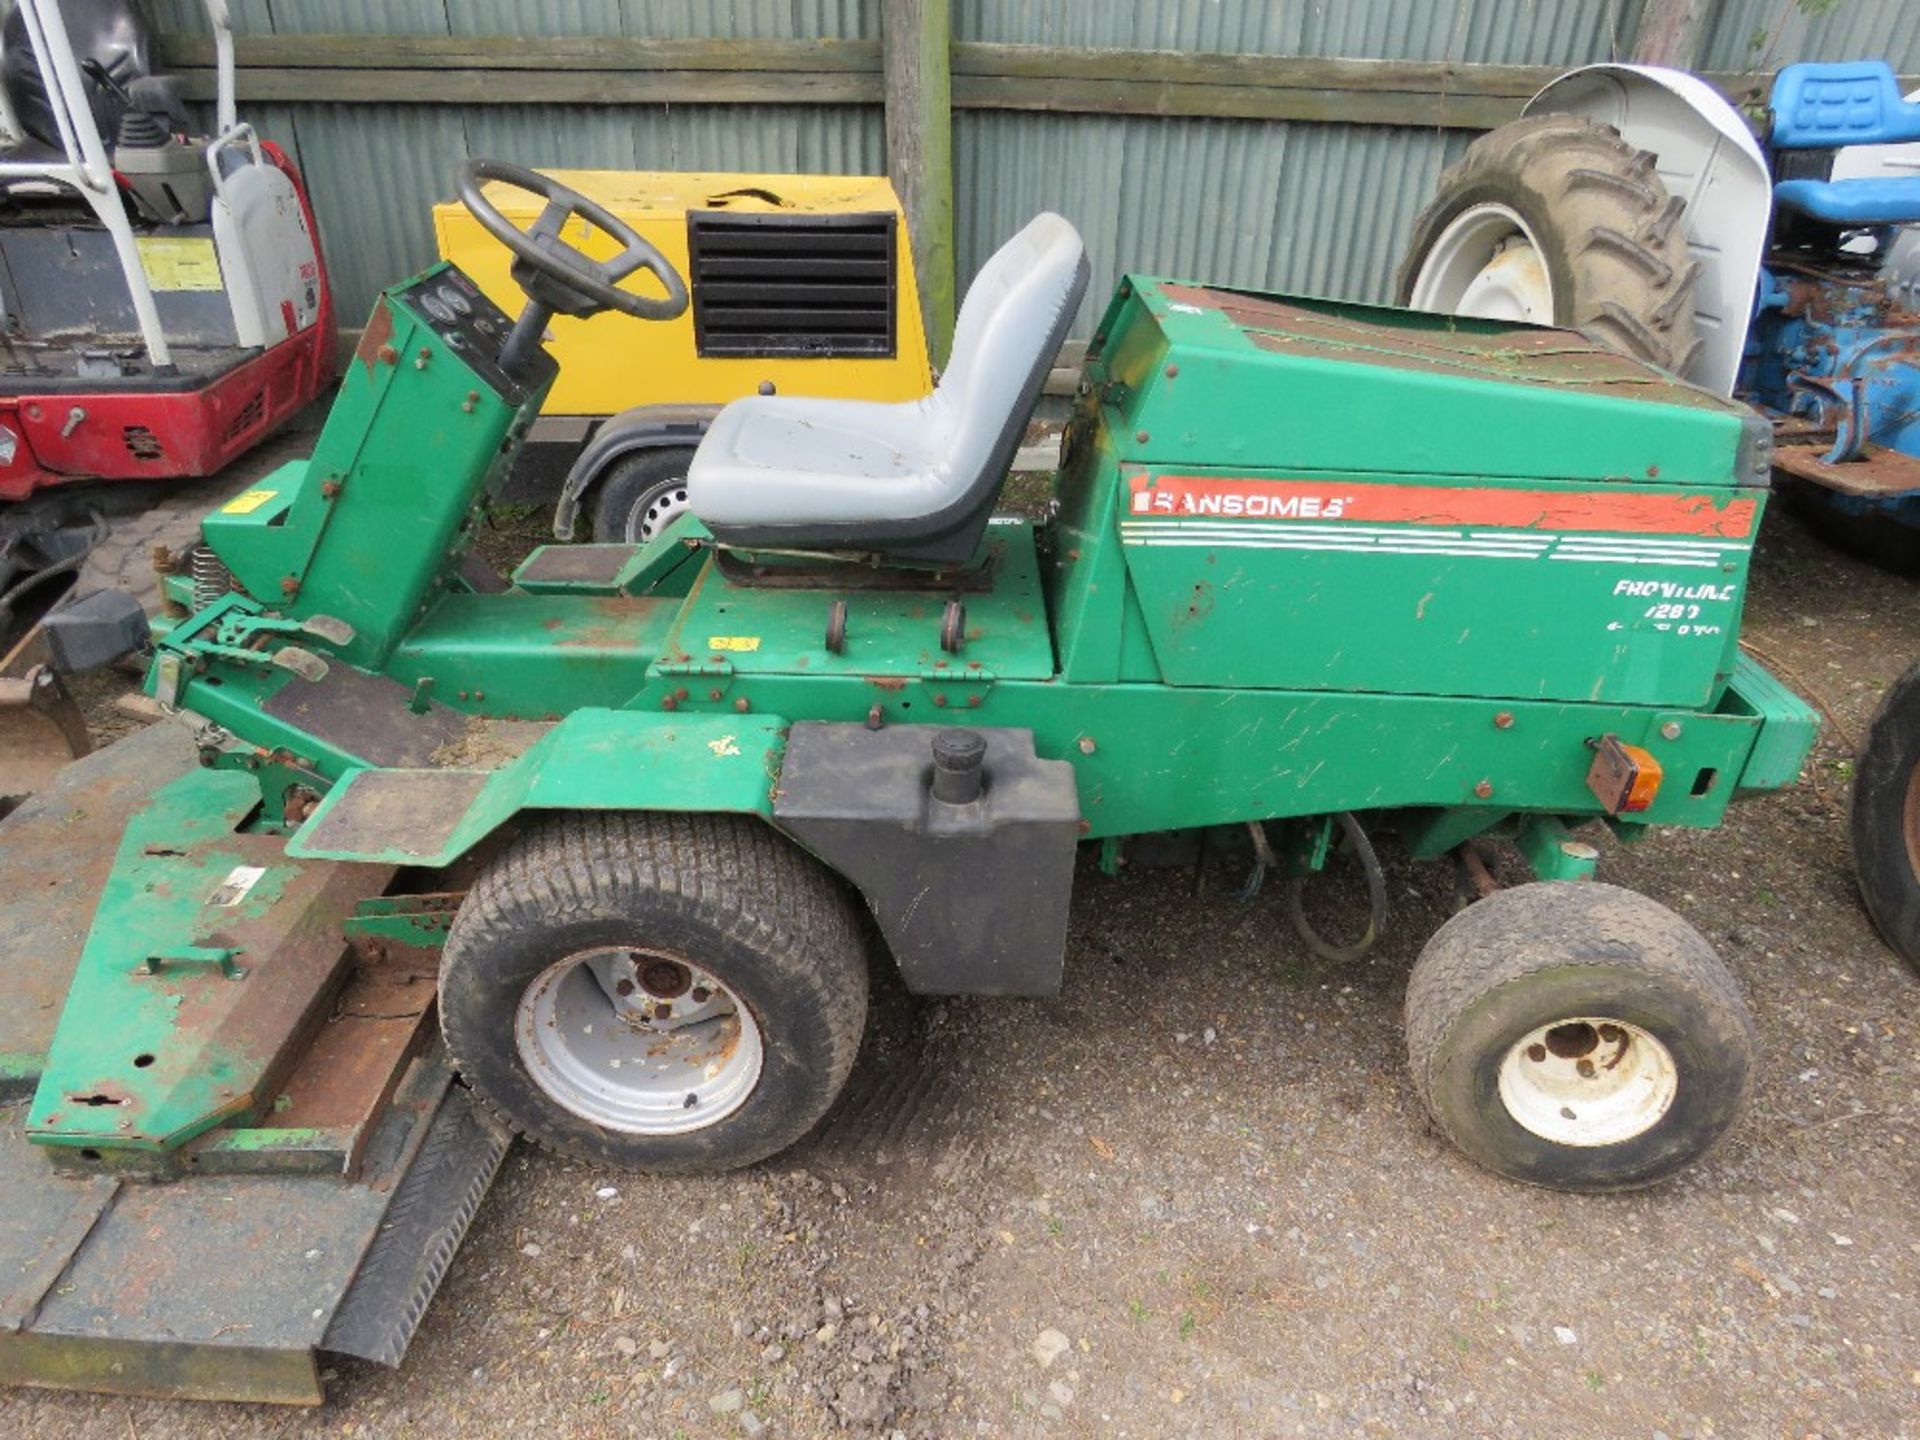 RANSOMES FRONTLINE 728D OUTFRONT RIDE ON MOWER. 4WD. 6FT CUT APPROX. WHEN TESTED WAS SEEN TO RUN AND - Image 4 of 8